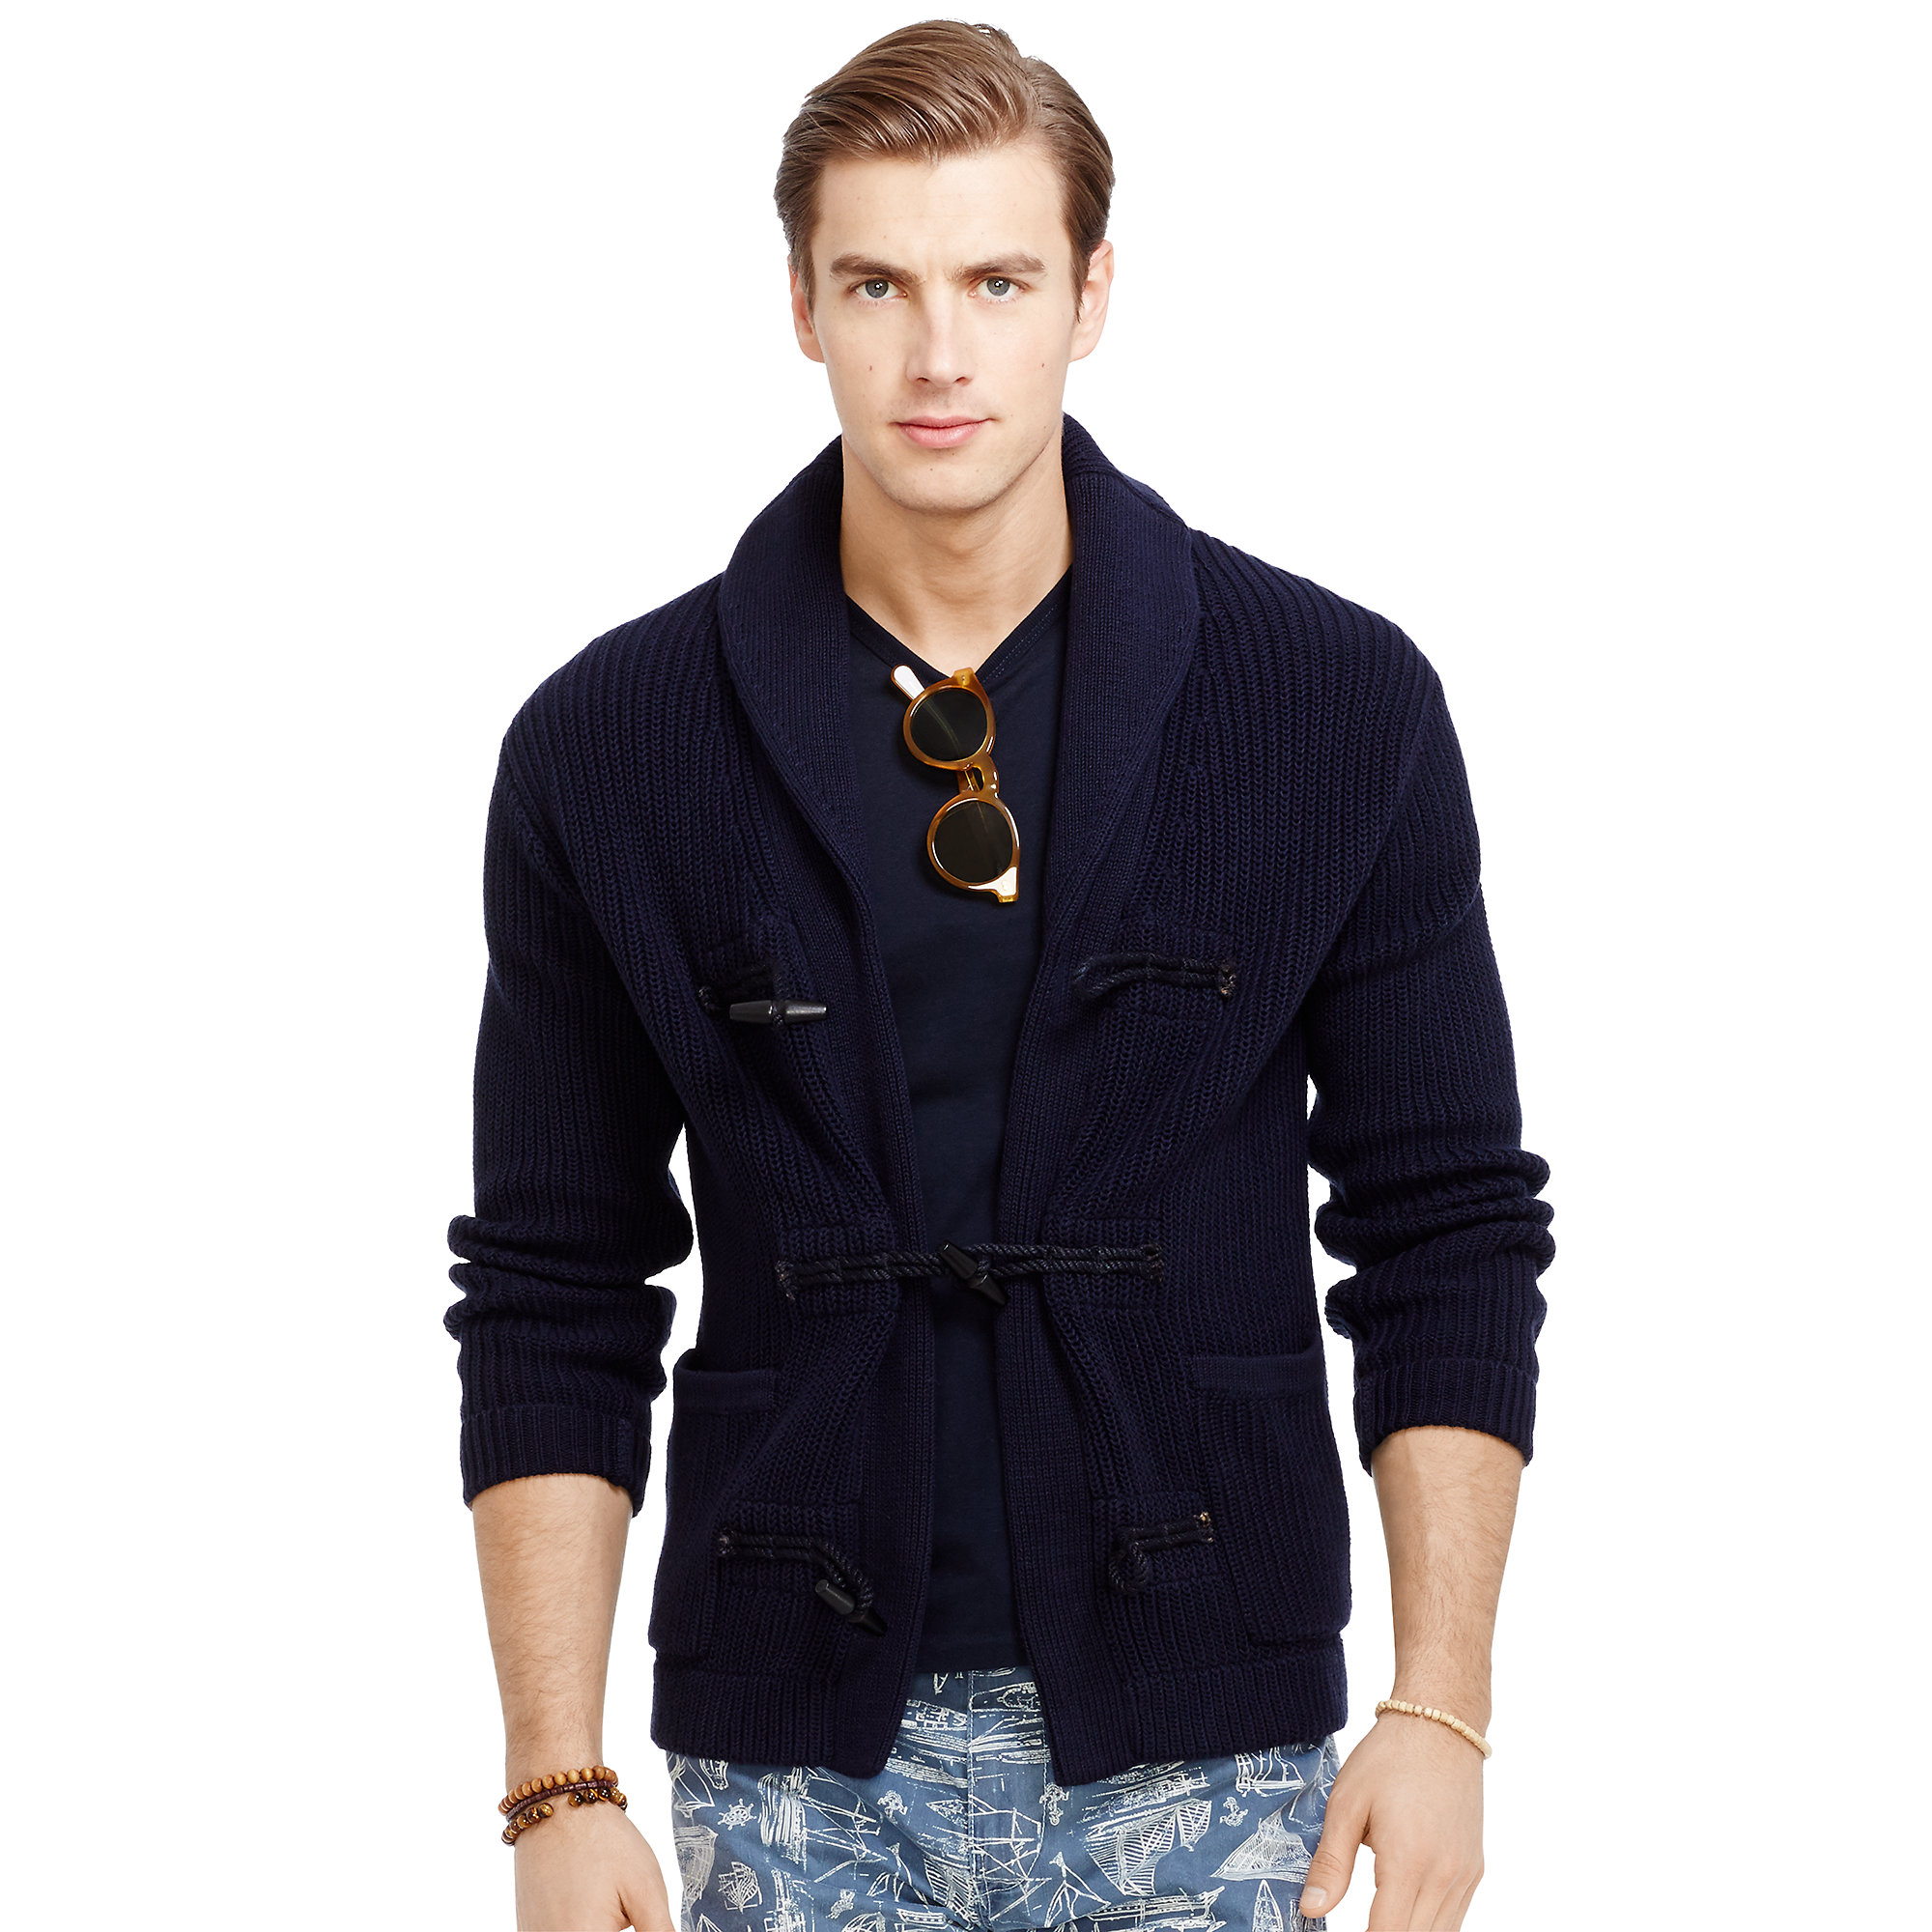 Lyst - Polo Ralph Lauren Cotton Toggle Cardigan in Blue for Men